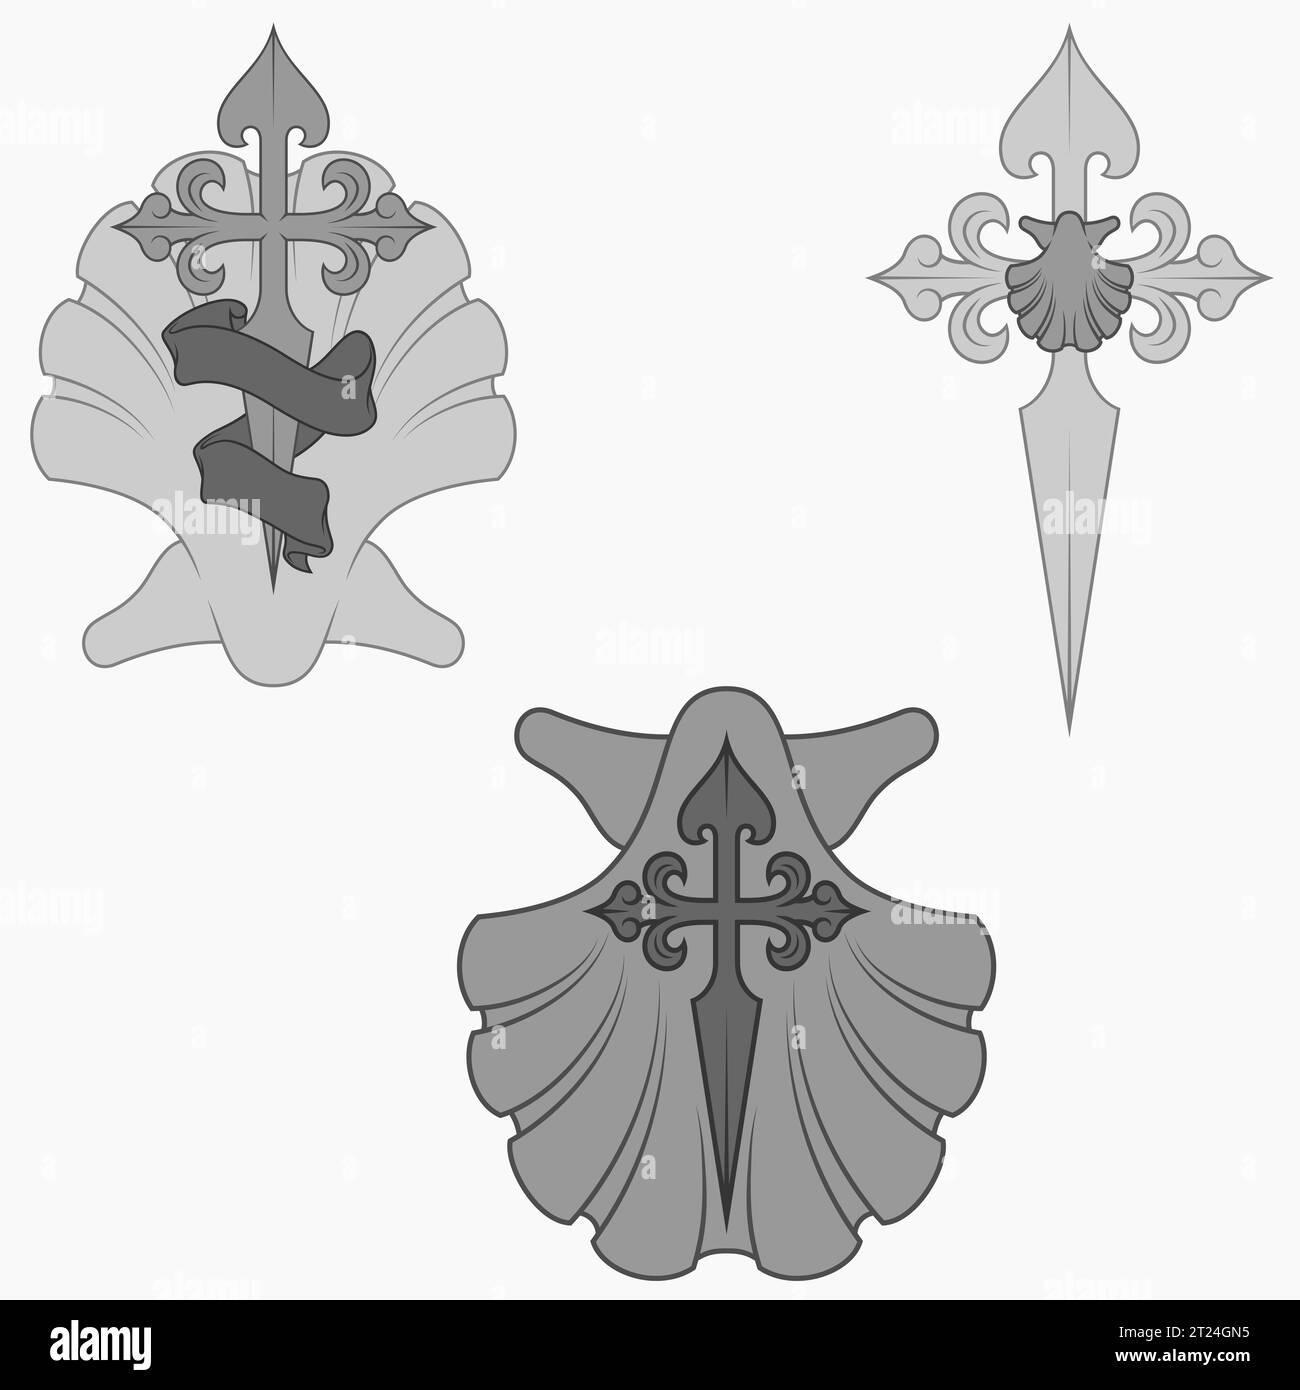 Vector design of christian symbology of the apostle santiago, santiago cross with scallop, sword and ribbon Stock Vector